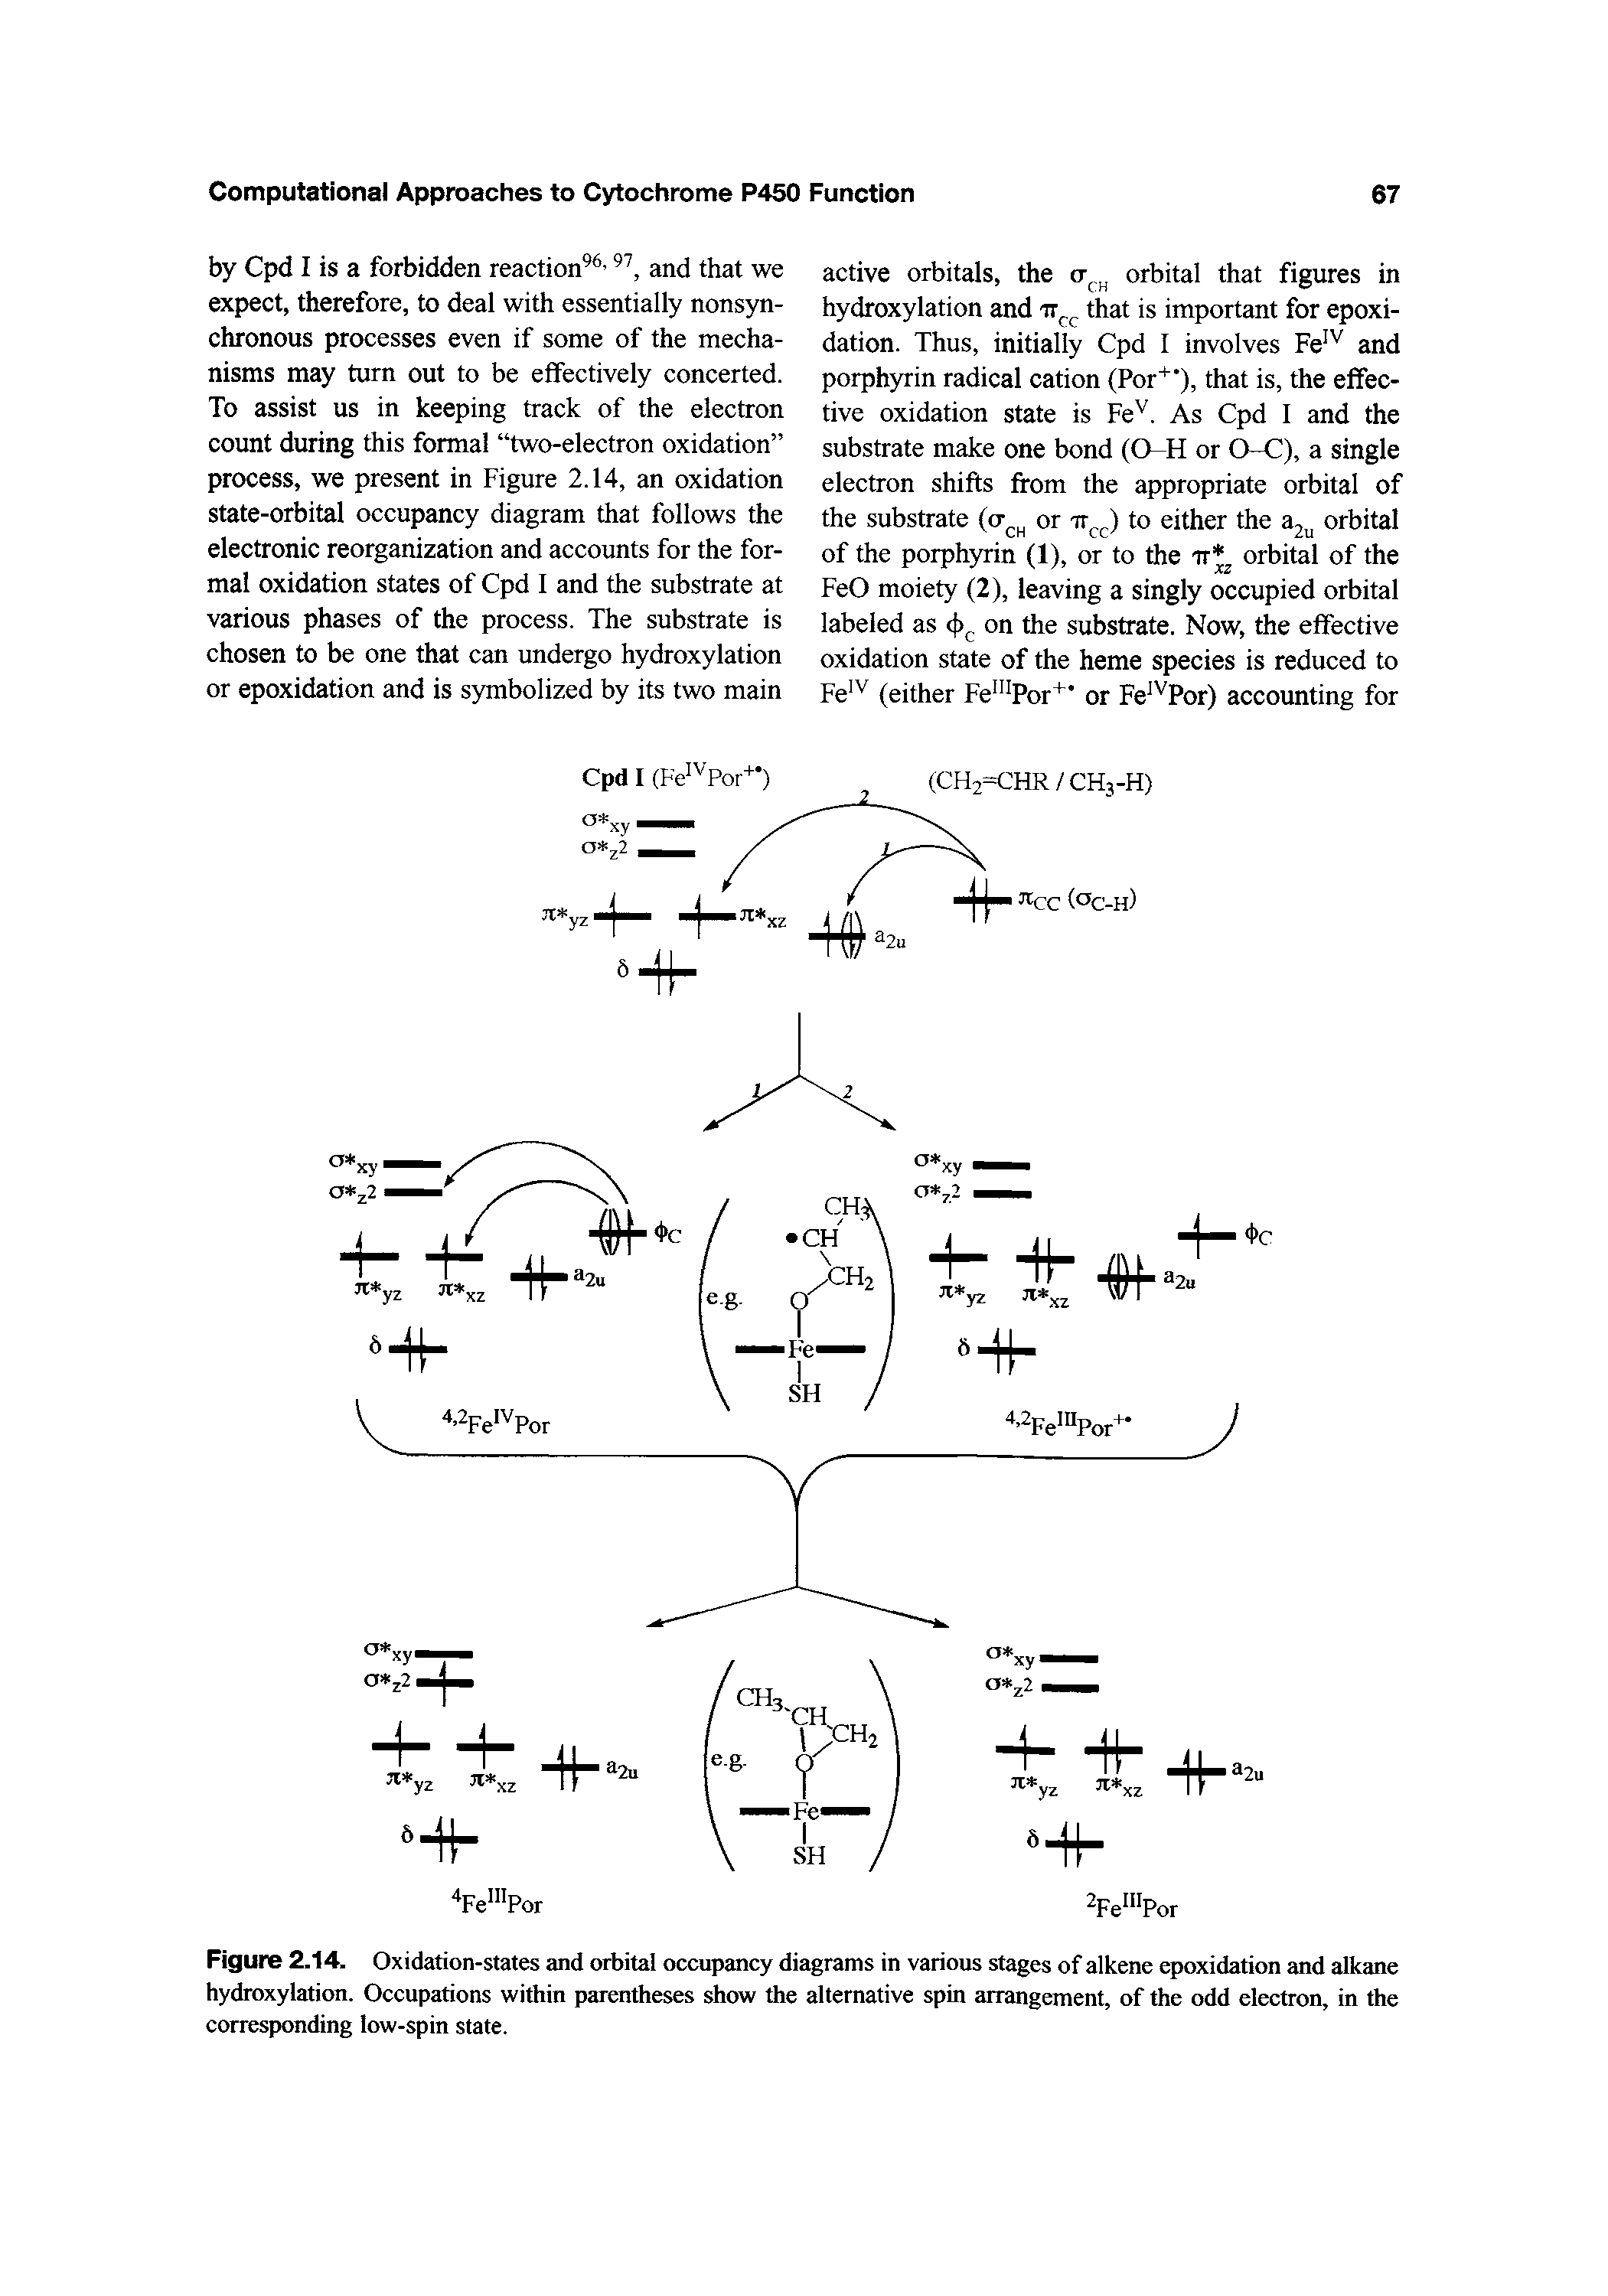 Figure 2.14. Oxidation-states and orbital occupancy diagrams in various stages of alkene epoxidation and alkane hydroxylation. Occupations within parentheses show the alternative spin arrangement, of the odd electron, in the corresponding low-spin state.